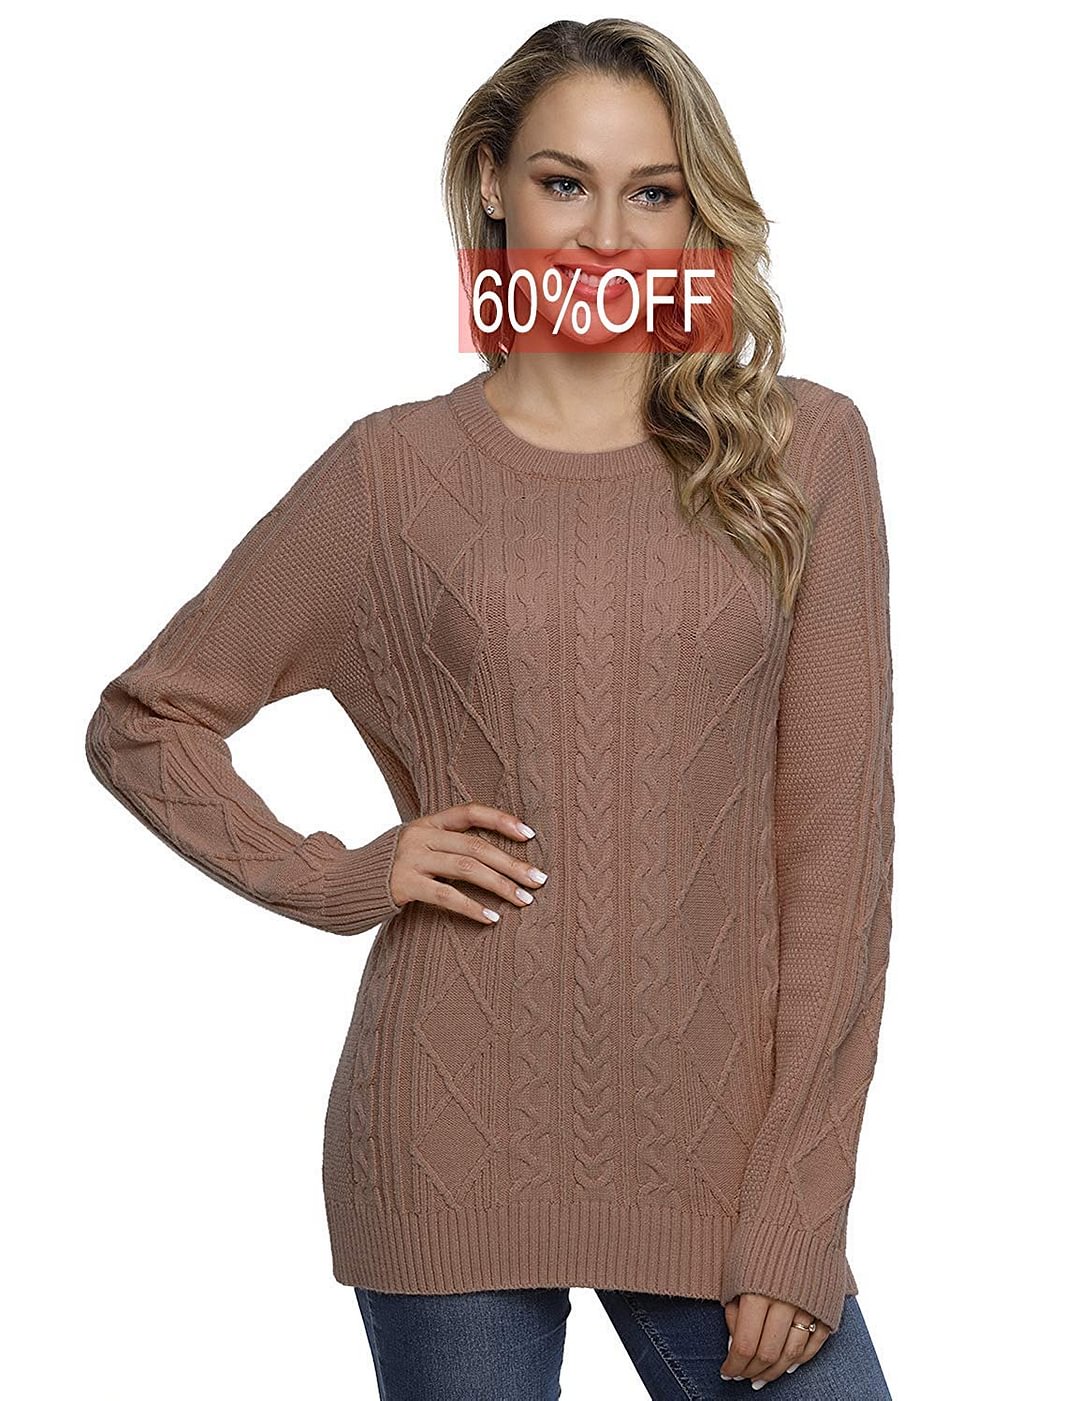 Women's Sweater Crewneck Cable Knit Long Sleeve Pullover Tops